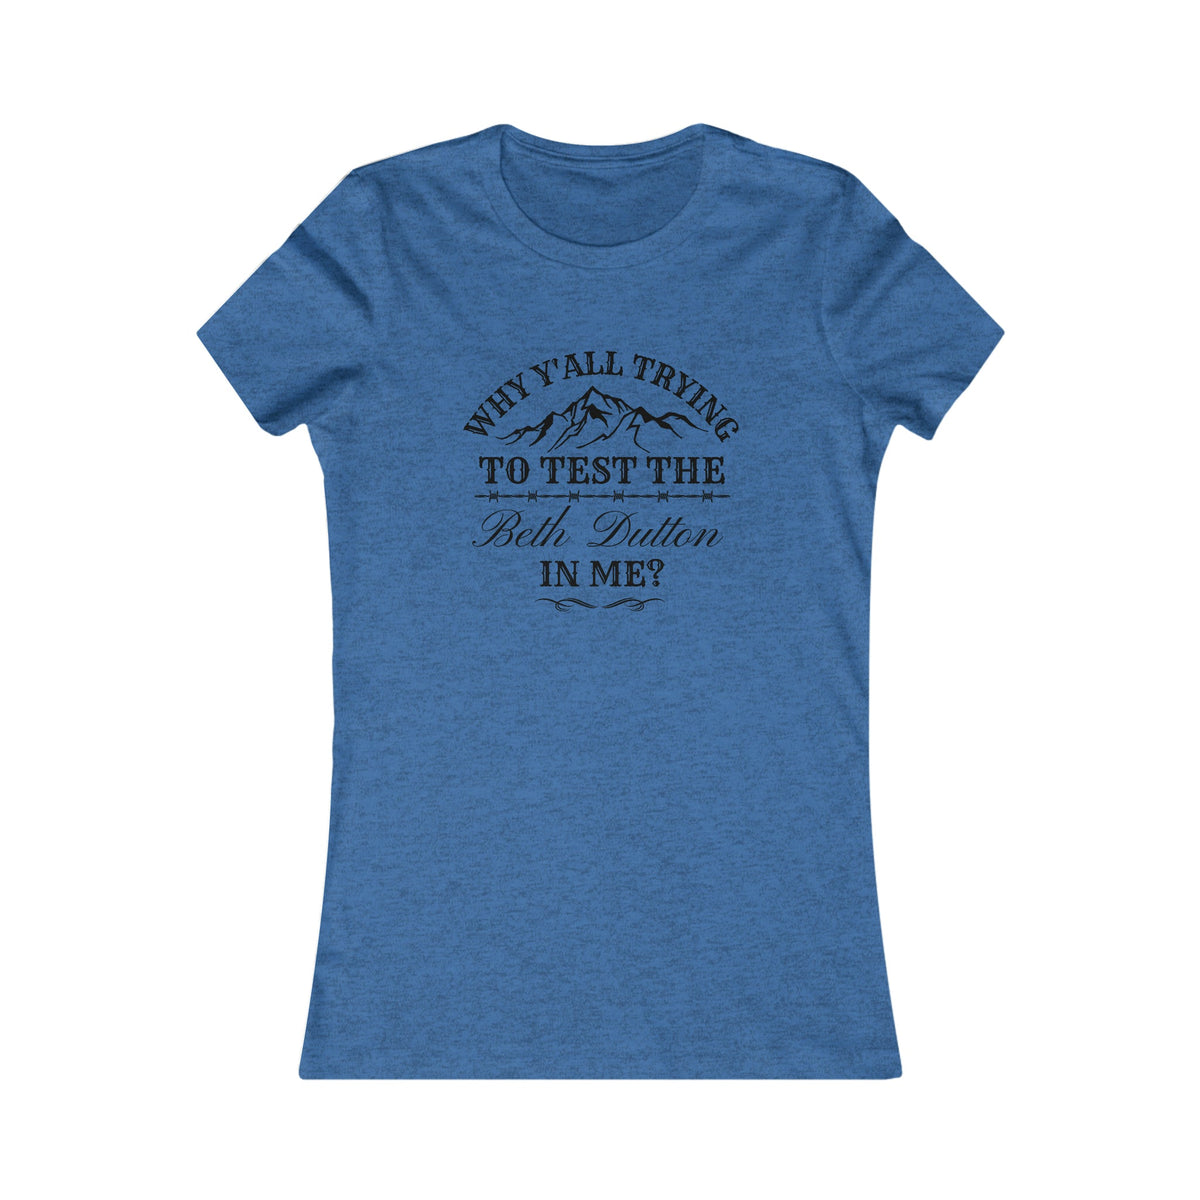 Testing The Beth Dutton In Me Women's Tee - Salty Medic Clothing Co.